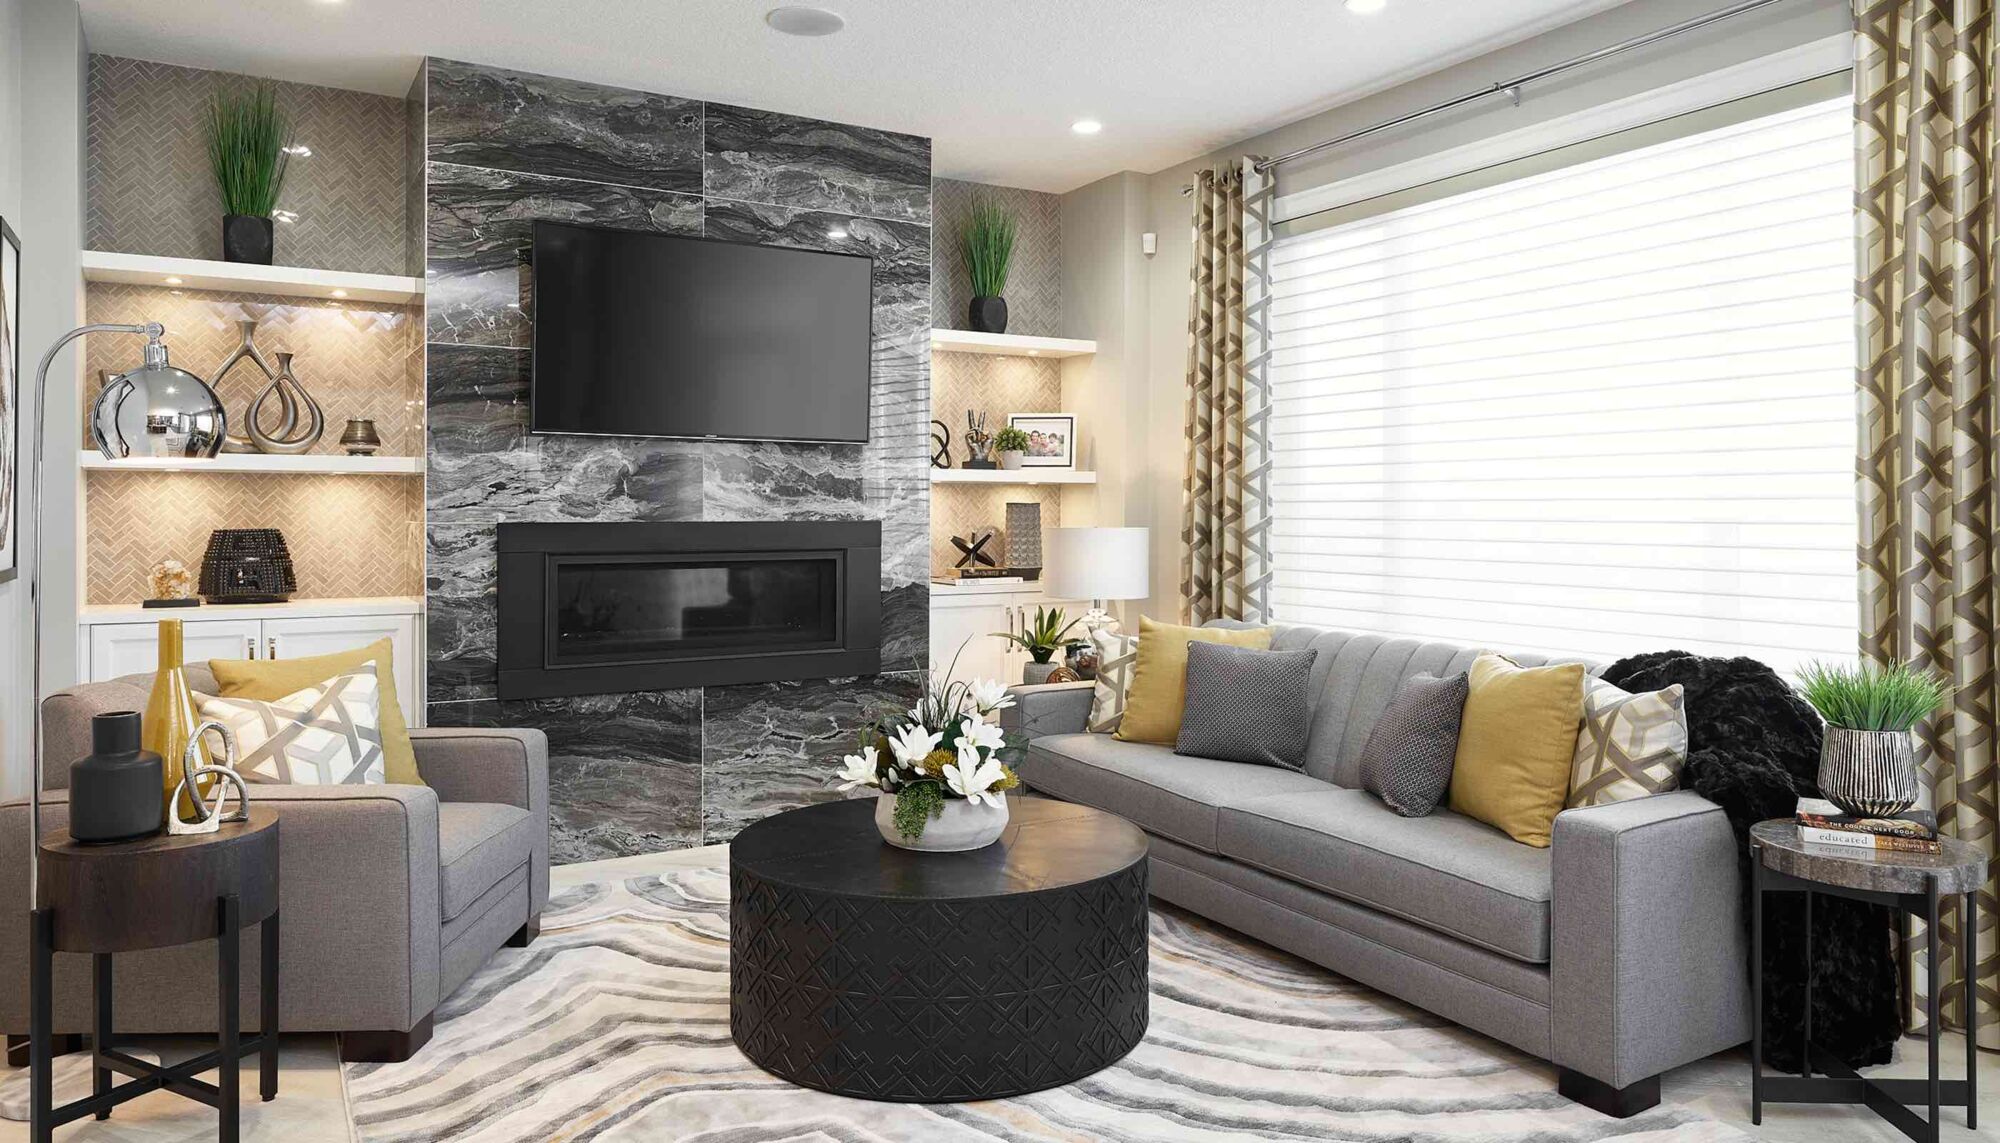 Living room with a grey couch and armchair surrounding a fireplace and television.